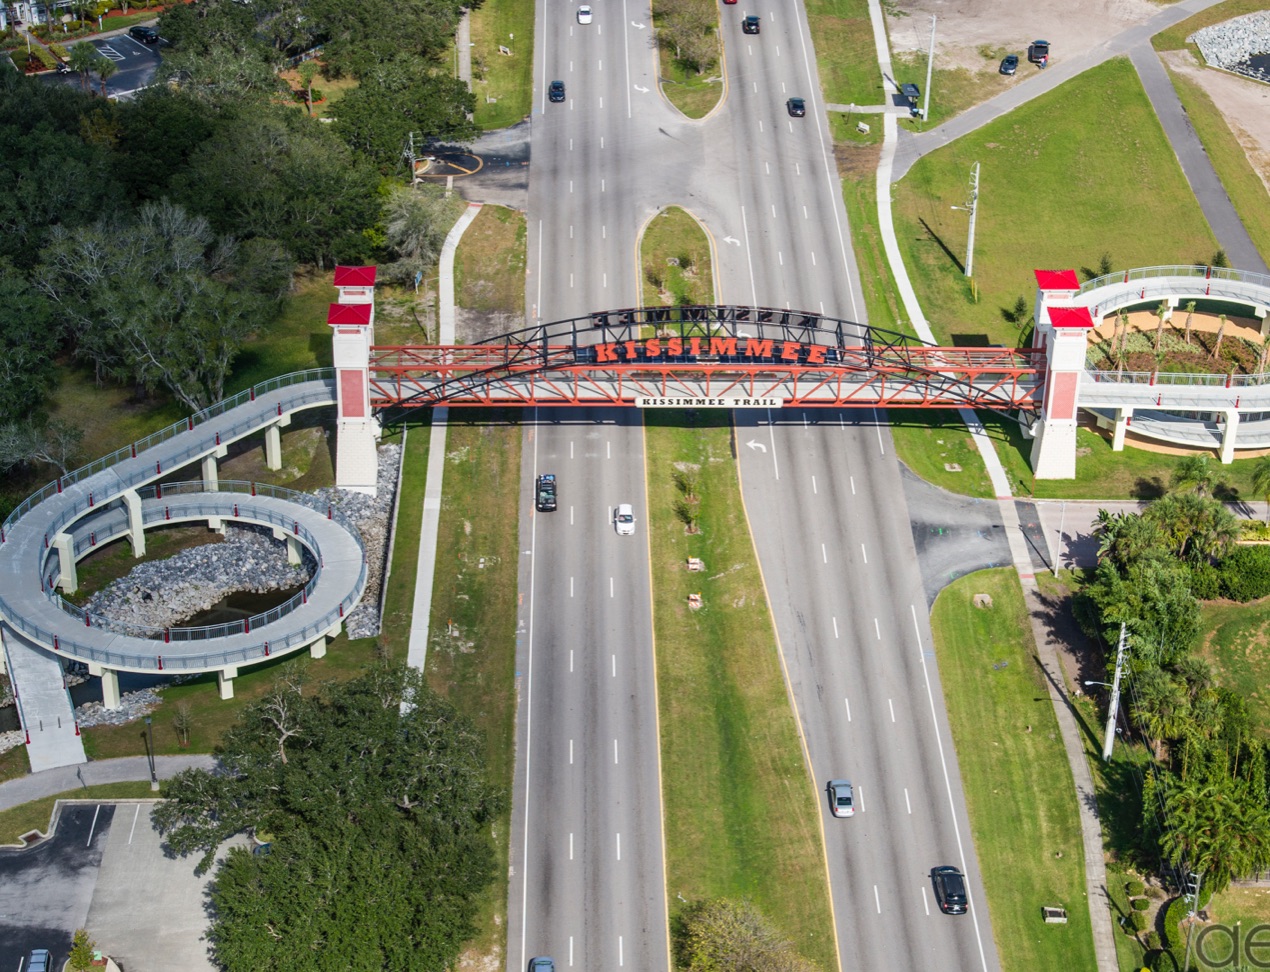 Kissimmee Trail Bridge view from sky